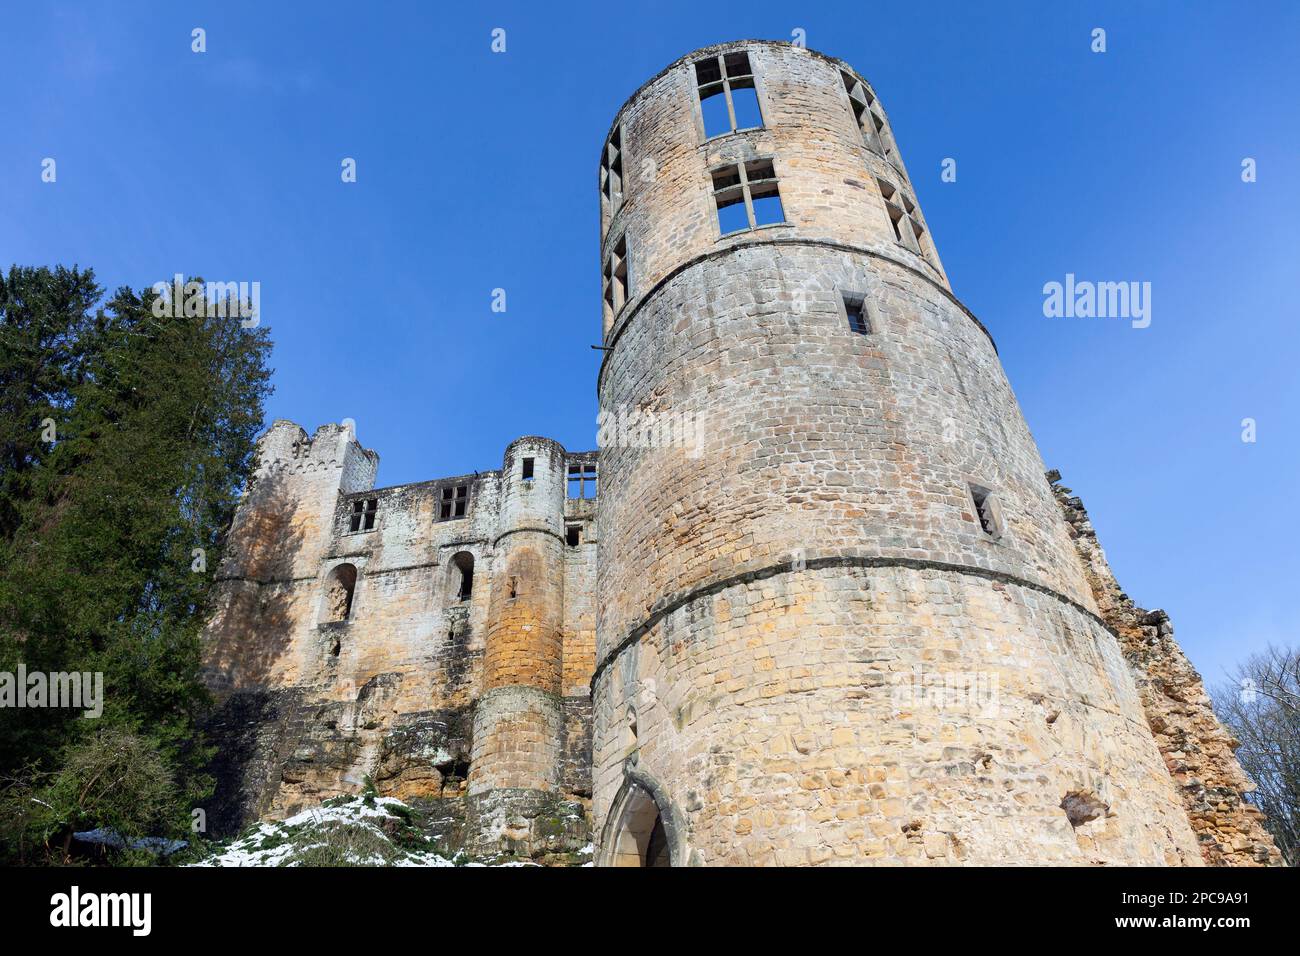 Europe, Luxembourg, Grevenmacher, Beaufort Castle in the Wintertime showing Renaissance Tower built above Medieval Walls Stock Photo